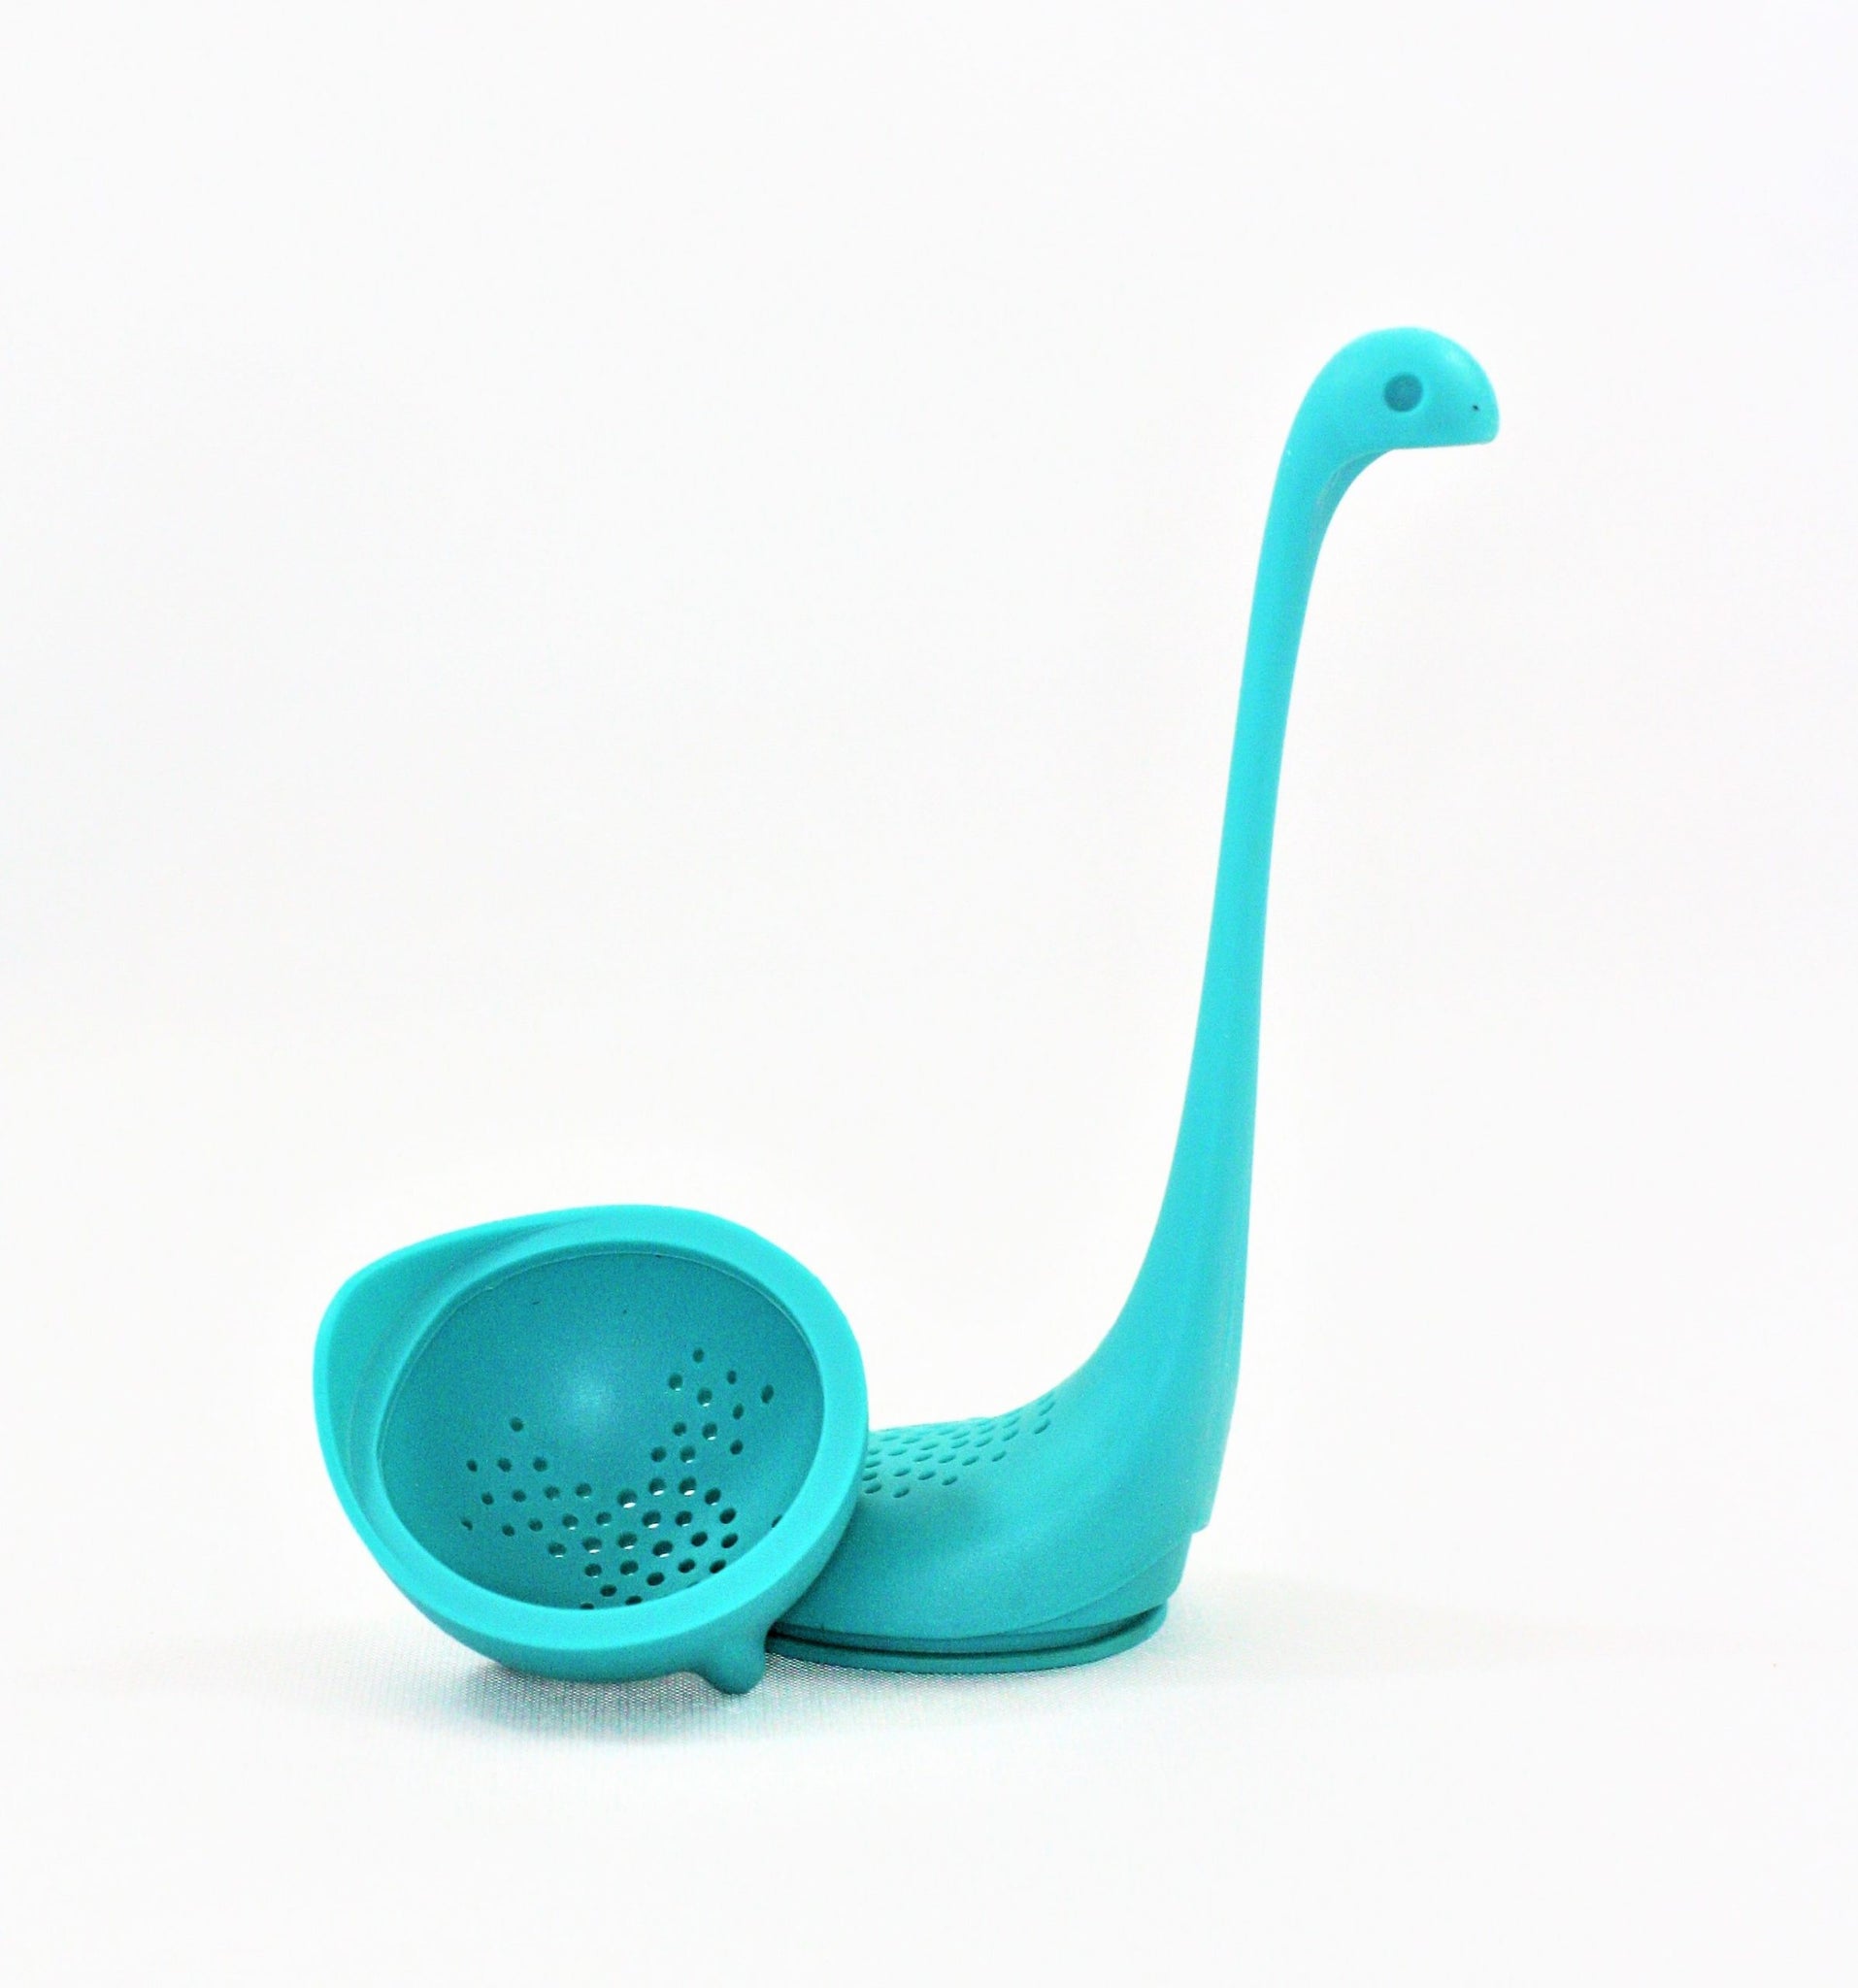 Baby Nessie Tea Infuser - Turquoise – Blue Seven